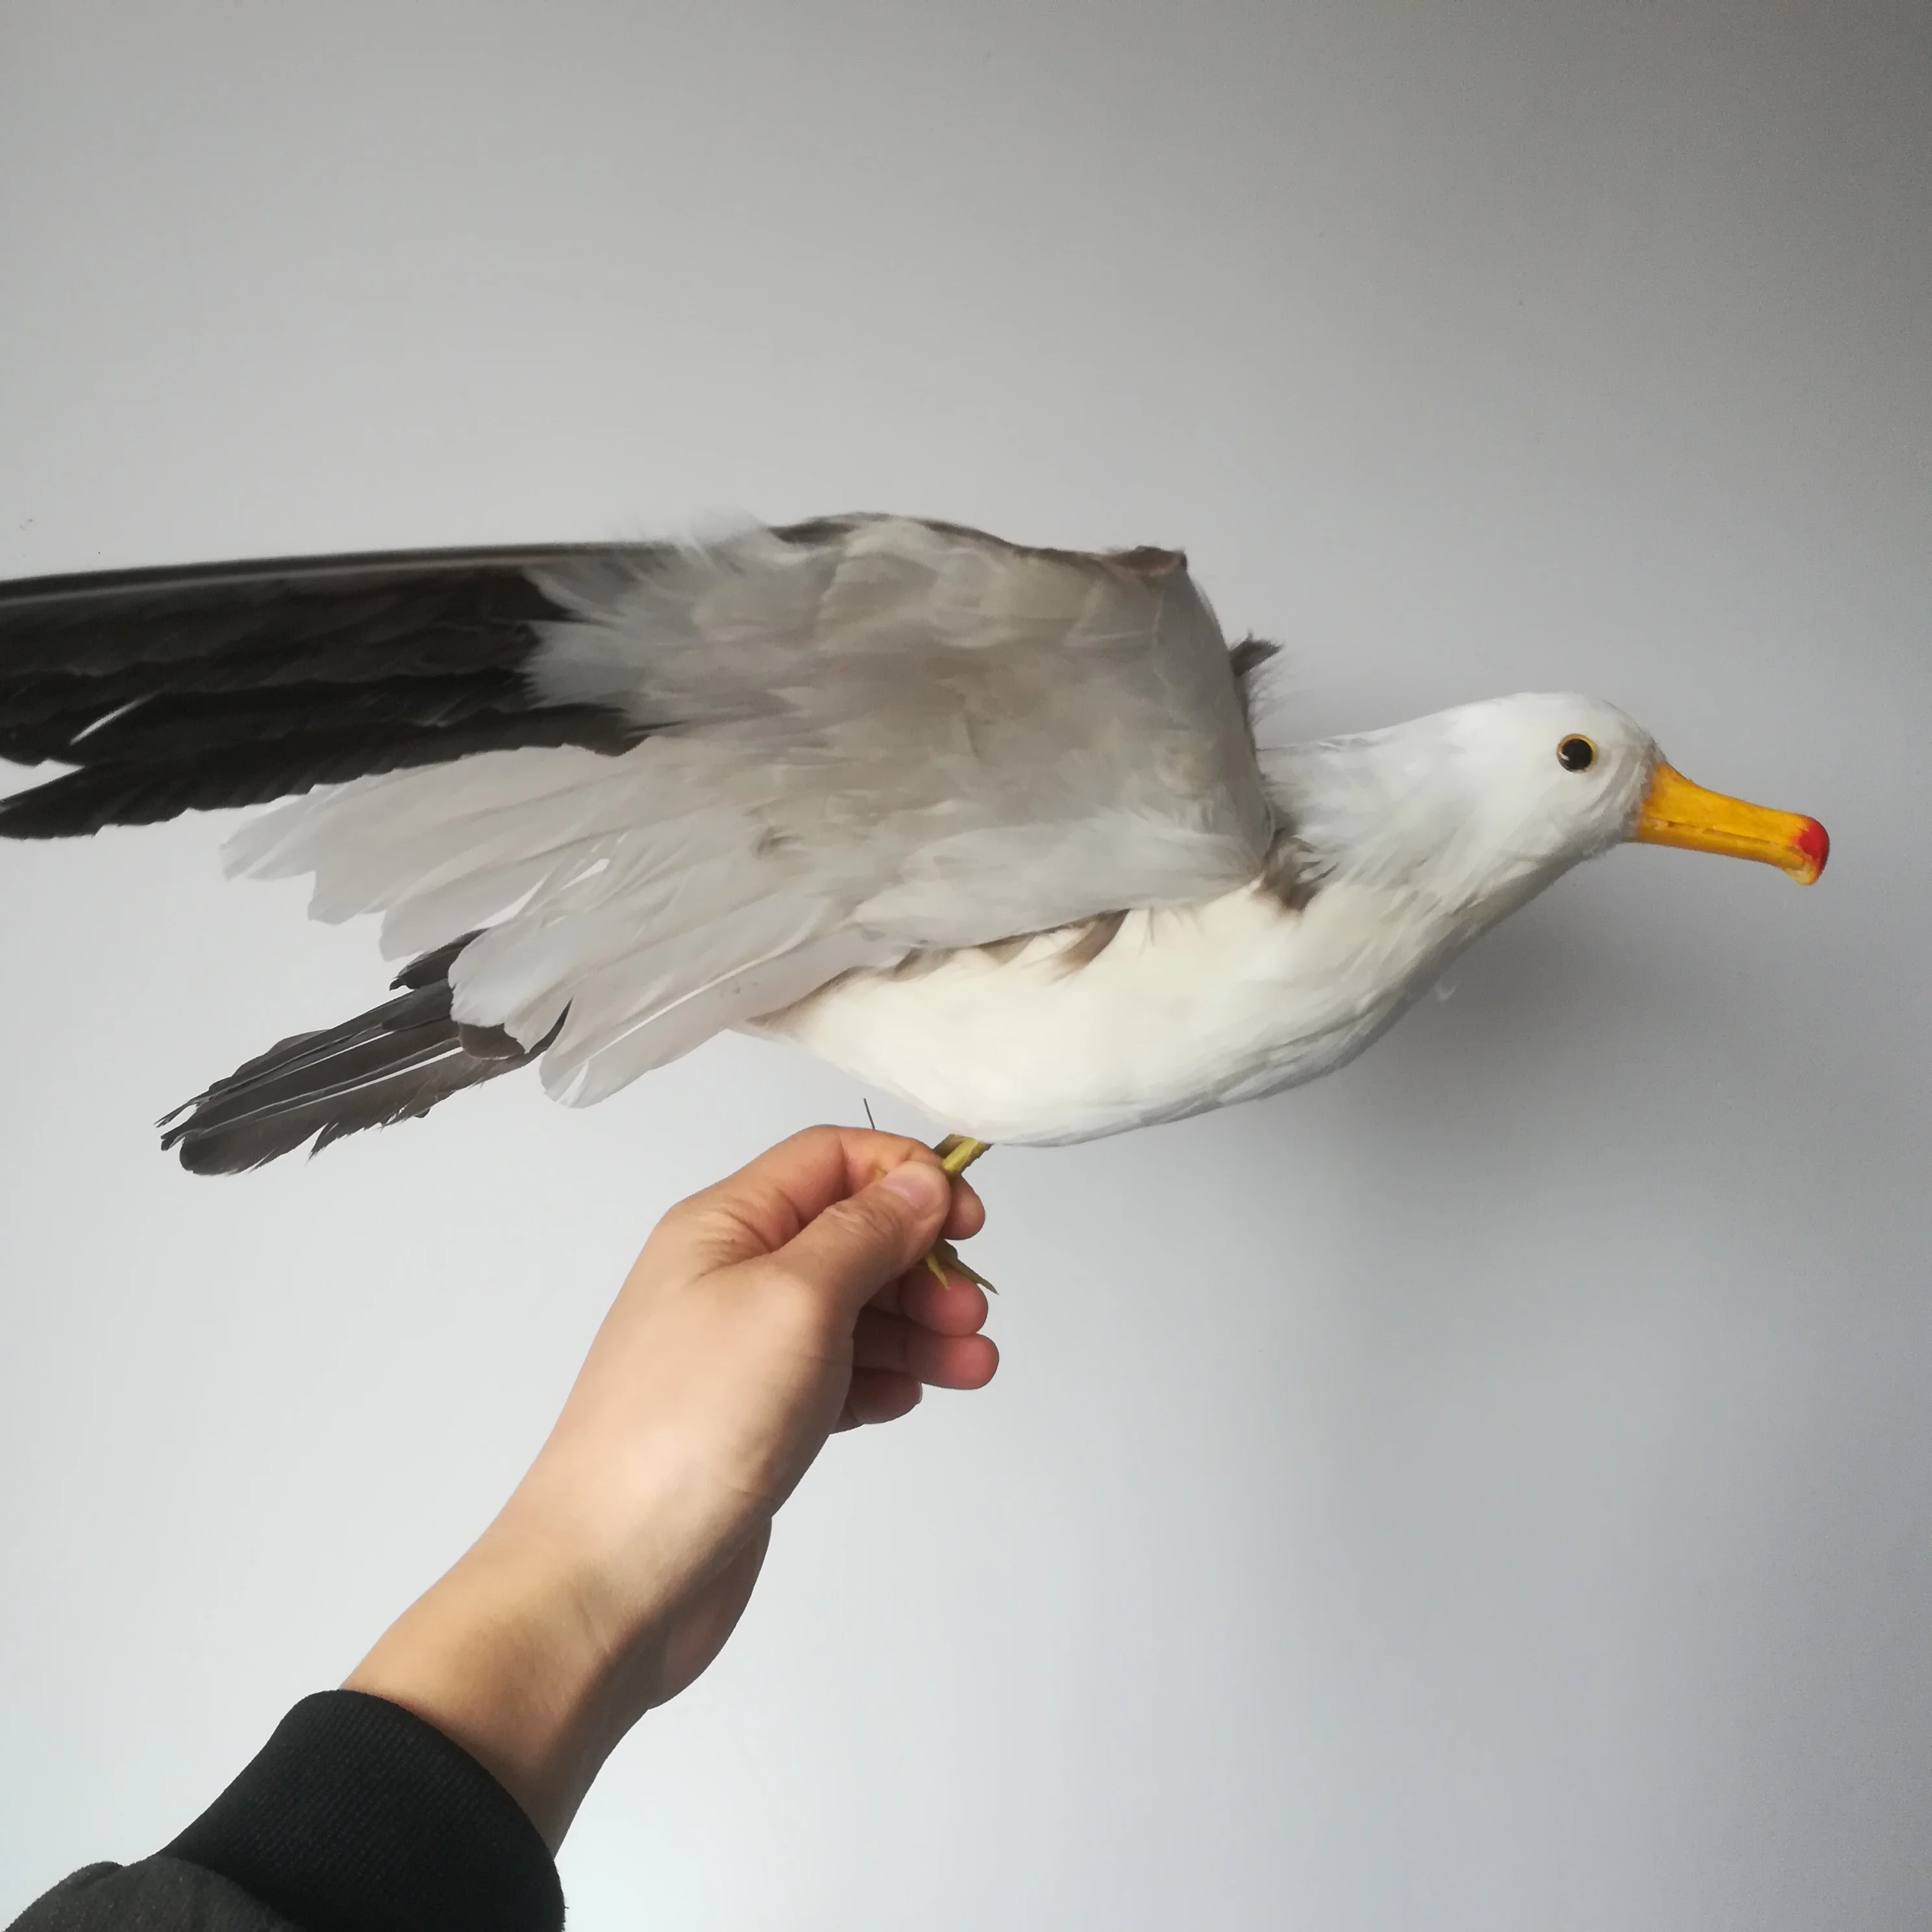 

real life toy foam&feathers seagull bird about 38x60cm spreading wings seagull hard model prop.home garden decoration gift w0819